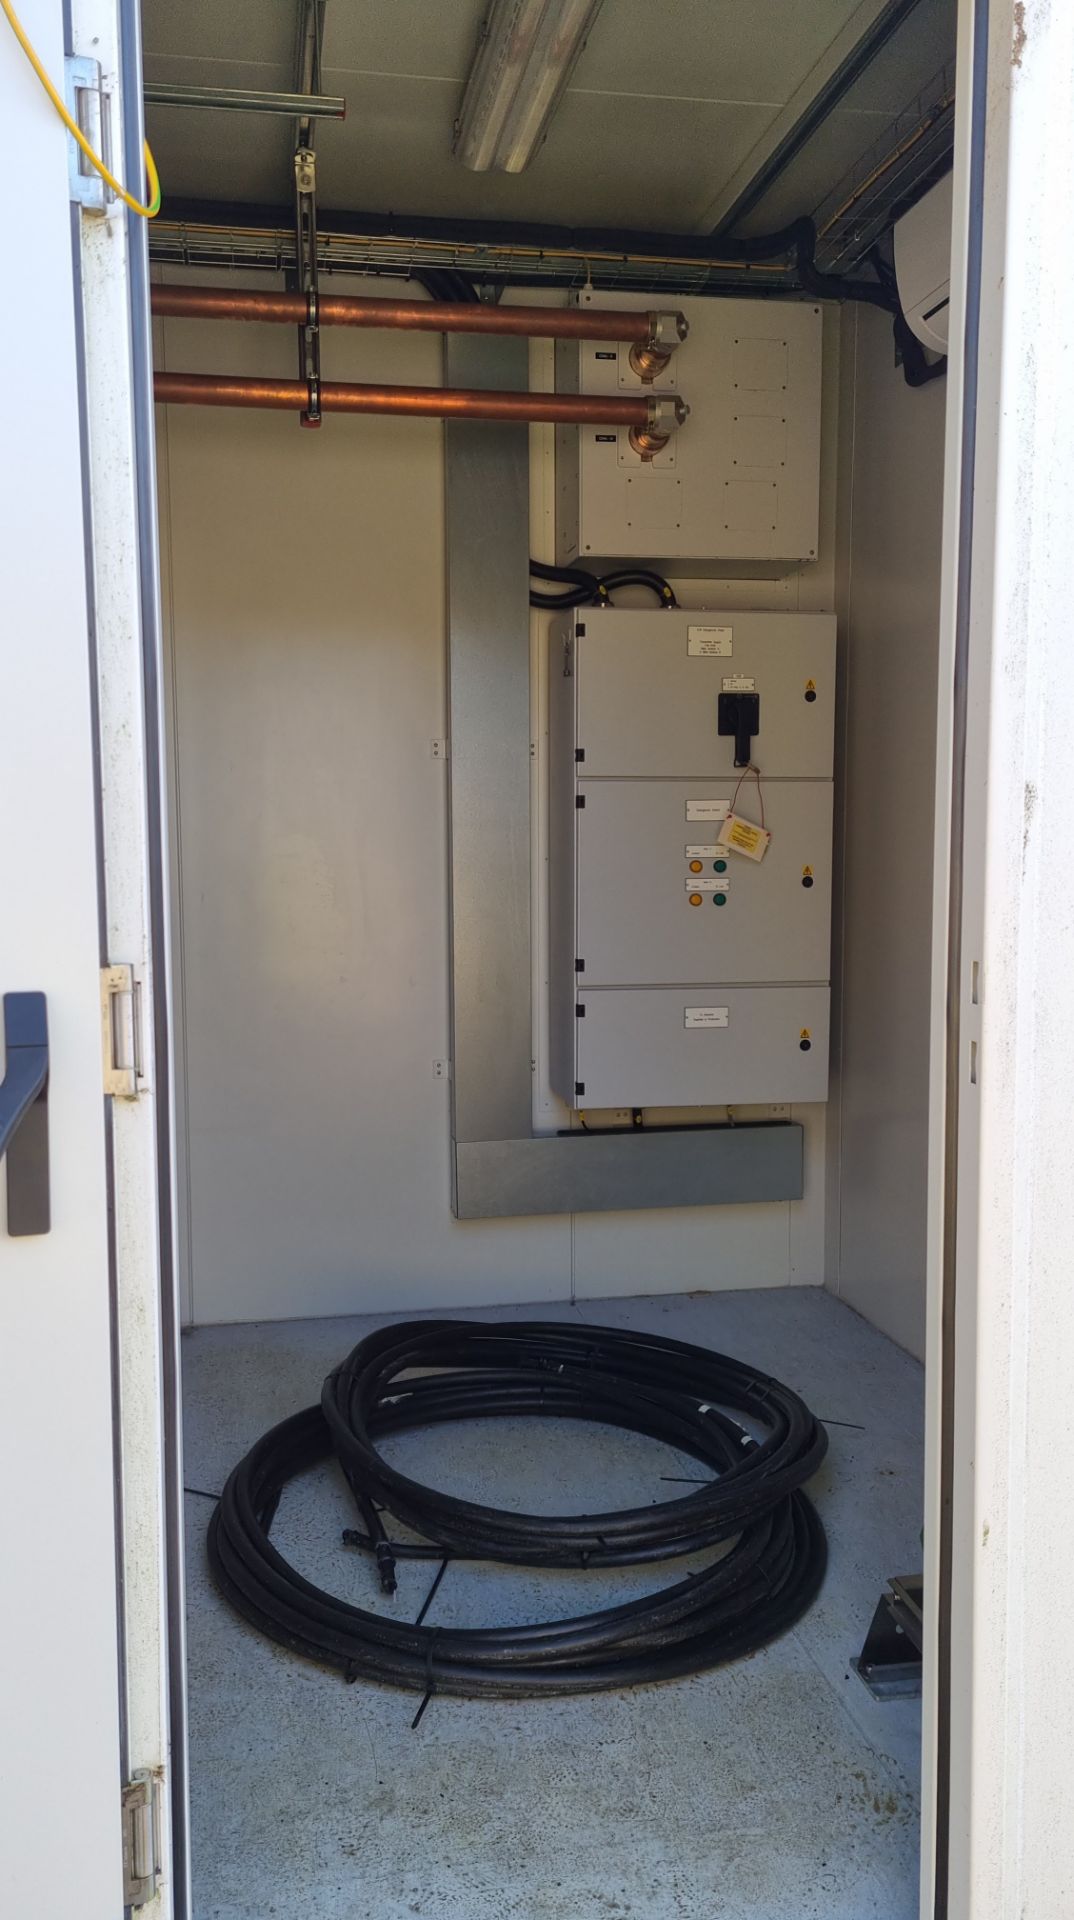 20ft insulated ISO container containing Rohde & Schwarz transmission equipment - see description - Image 33 of 50